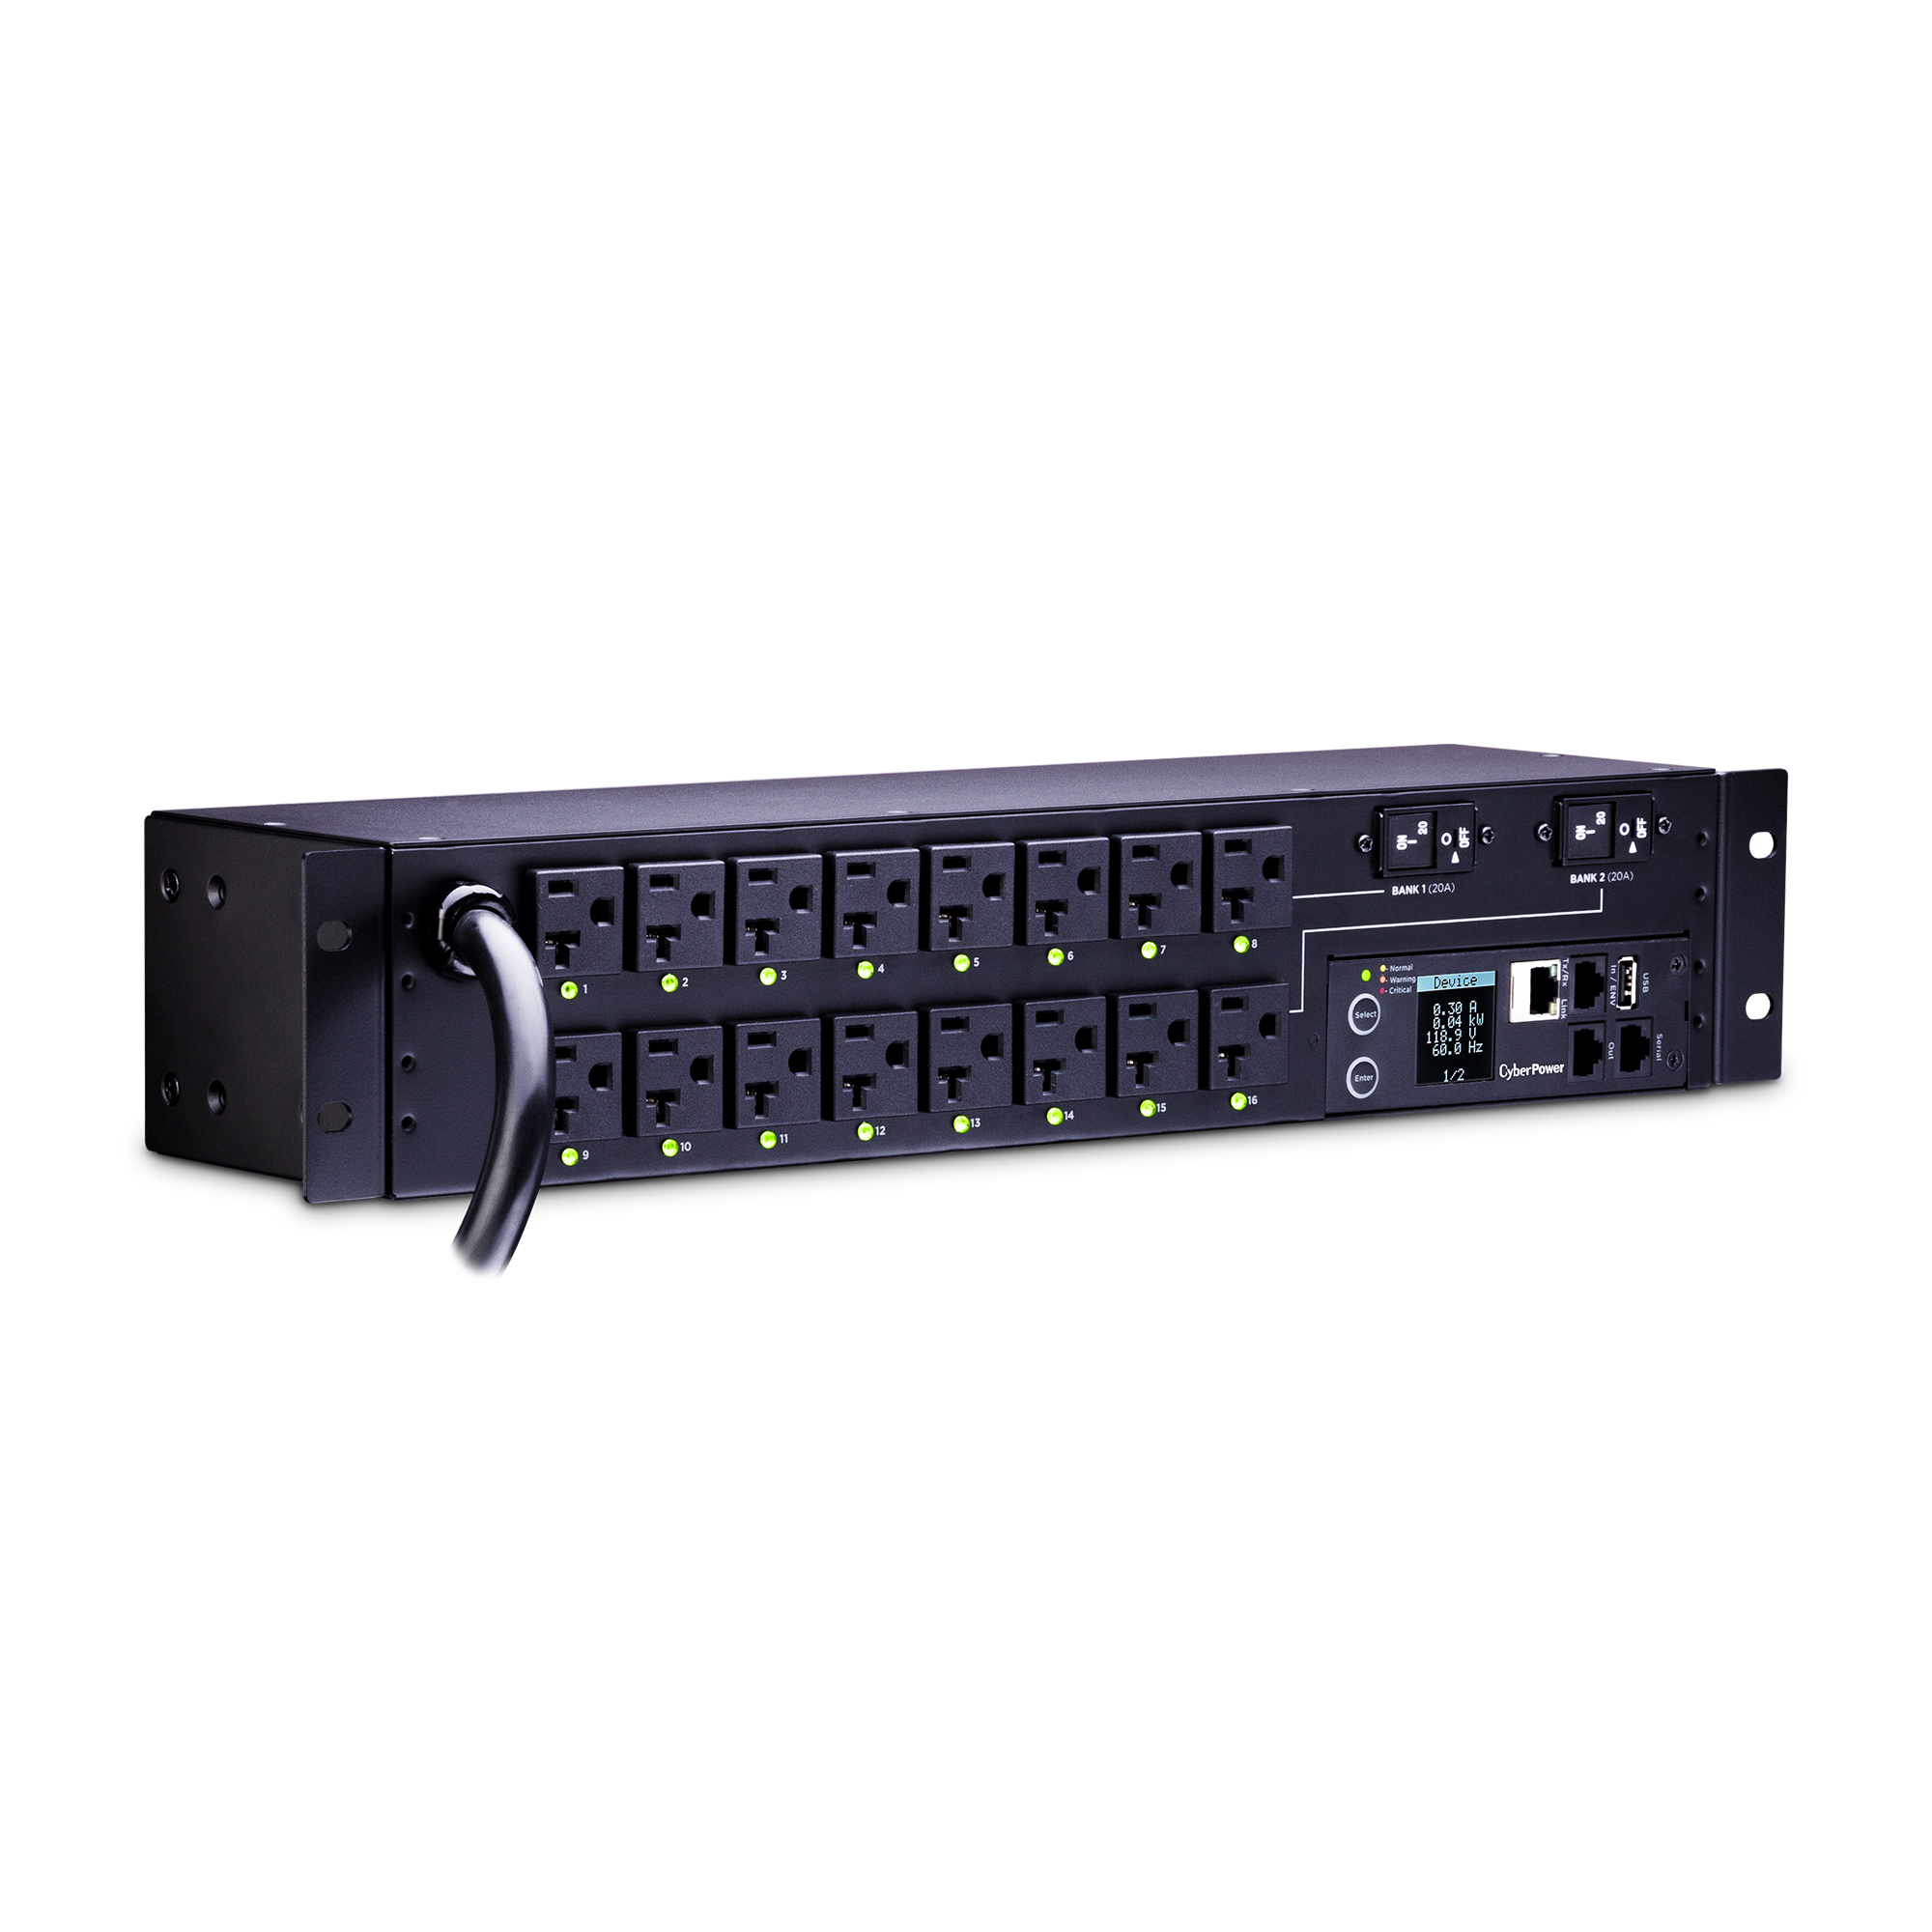 1U Rackmount CyberPower PDU81002 Switched Metered-By-Outlet PDU 100-120V/20A 8 Outlets 